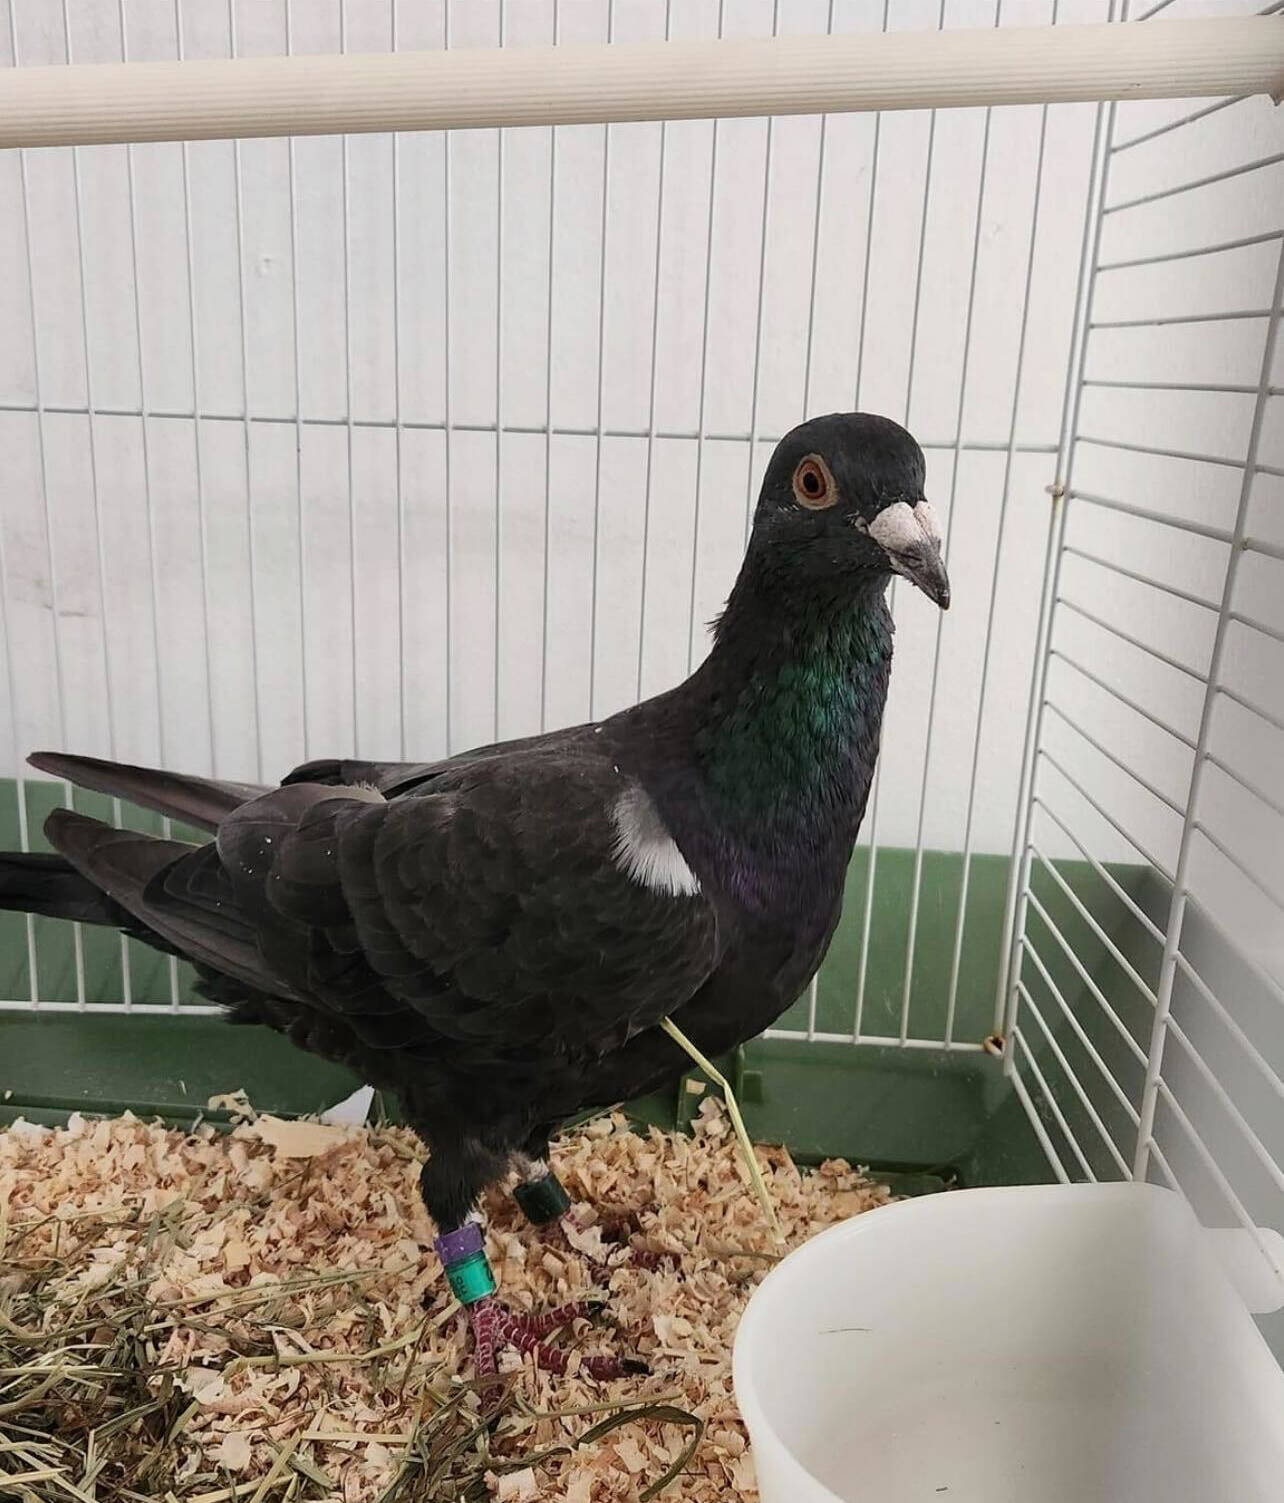 Bert a racing pigeon from Nanaimo was returned home after showing up near Williams Lake. (BCSPCA Williams Lake photo)